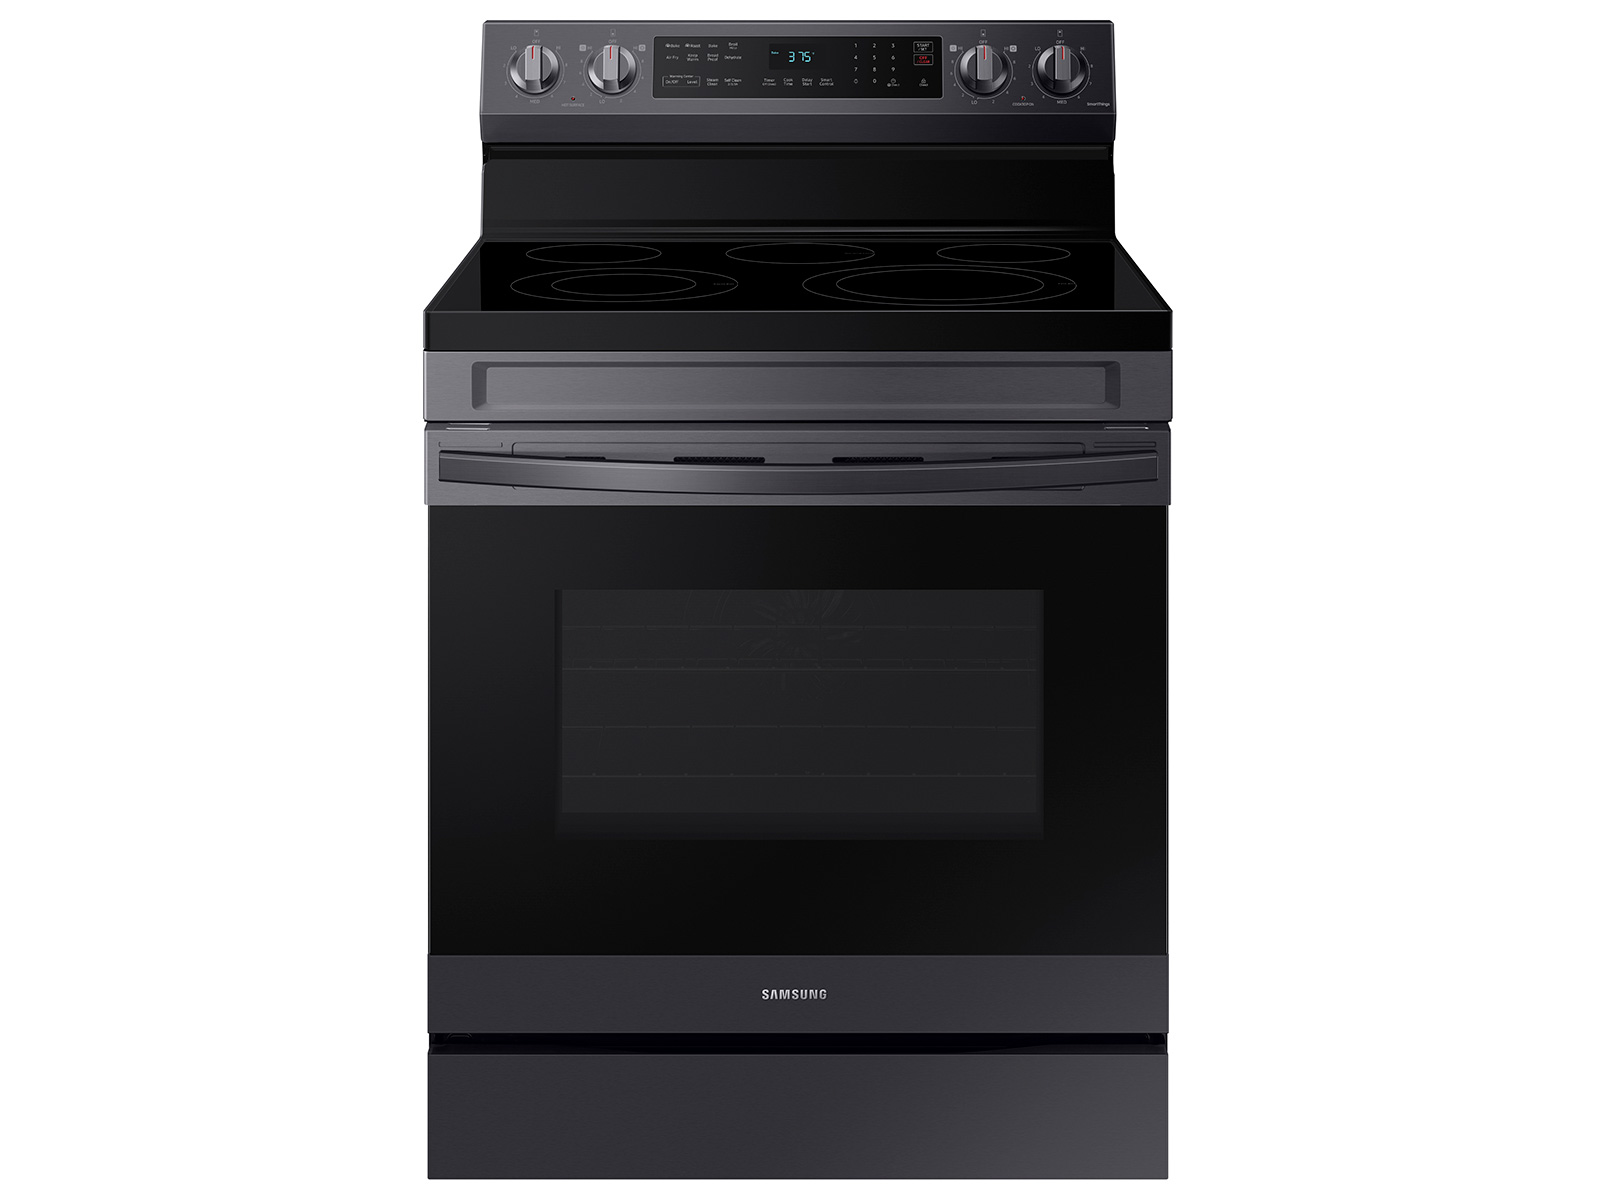 Samsung 6.3 cu. ft. Smart Freestanding Electric Range with No-Preheat Air Fry & Convection in Black Stainless Steel(NE63A6511SG/AA)